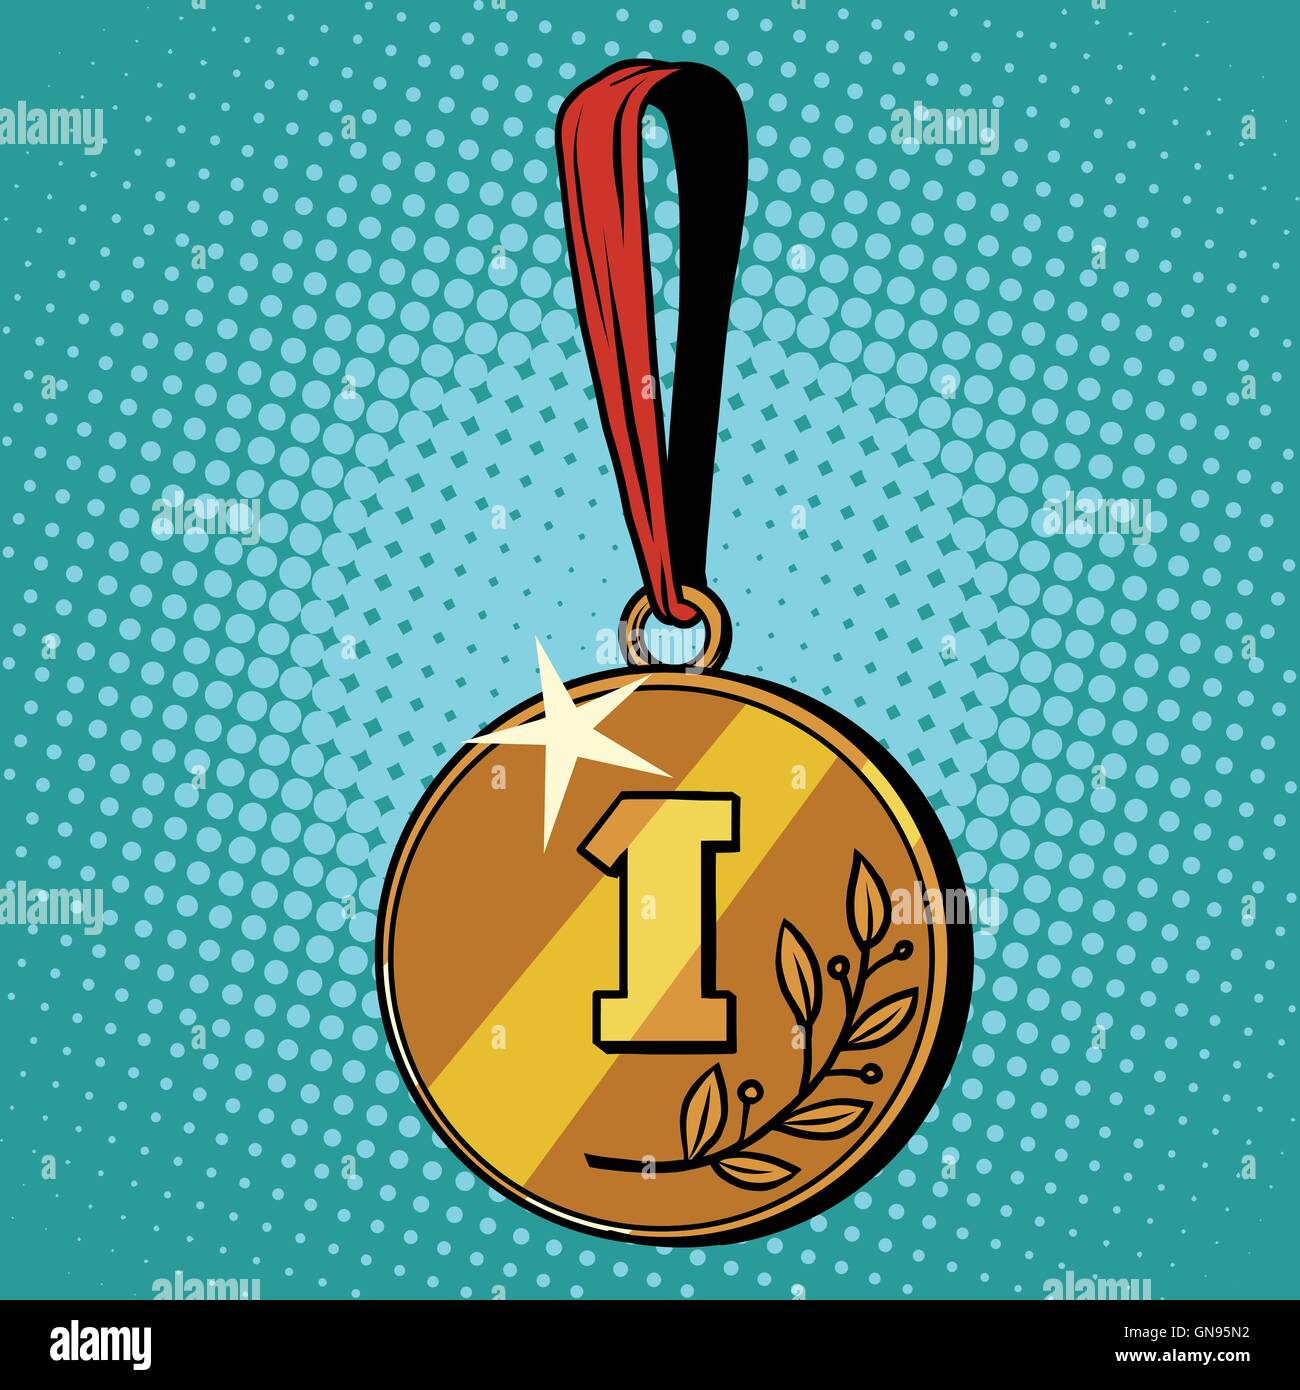 Medal for first place Stock Vector